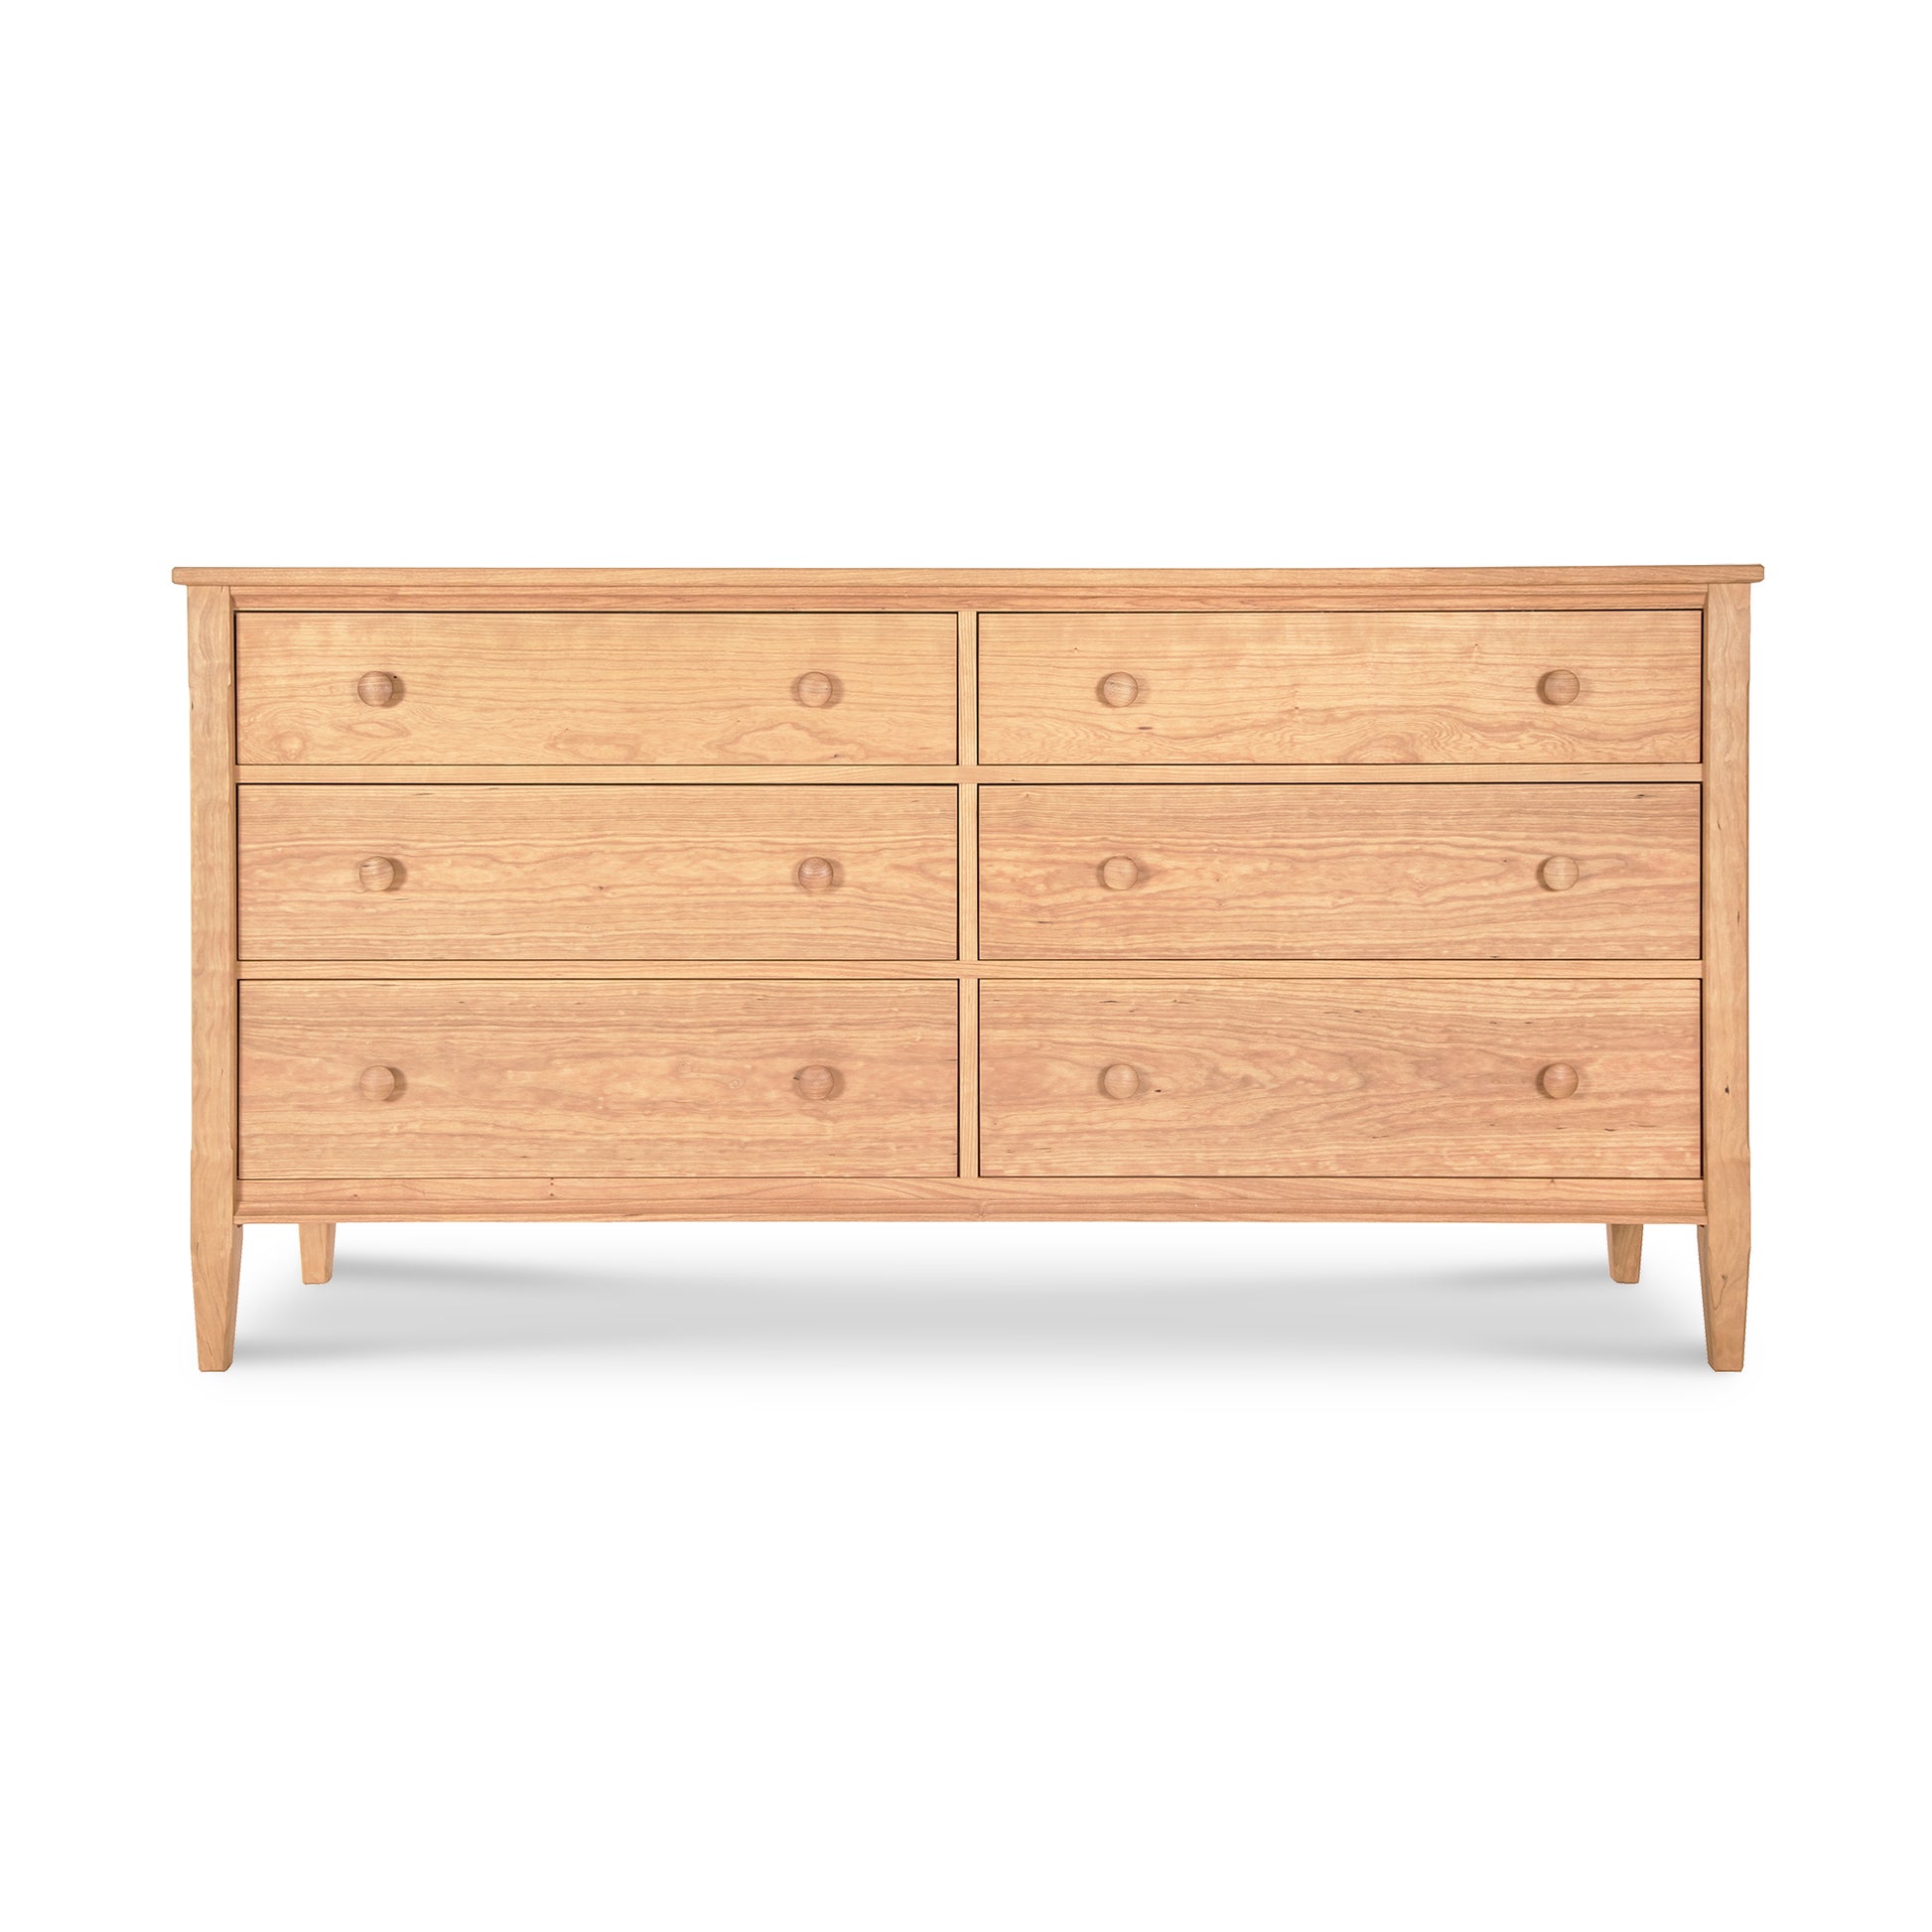 A Vermont Shaker 6-Drawer Dresser made by Maple Corner Woodworks, featuring multiple drawers, displayed against a clean white background.